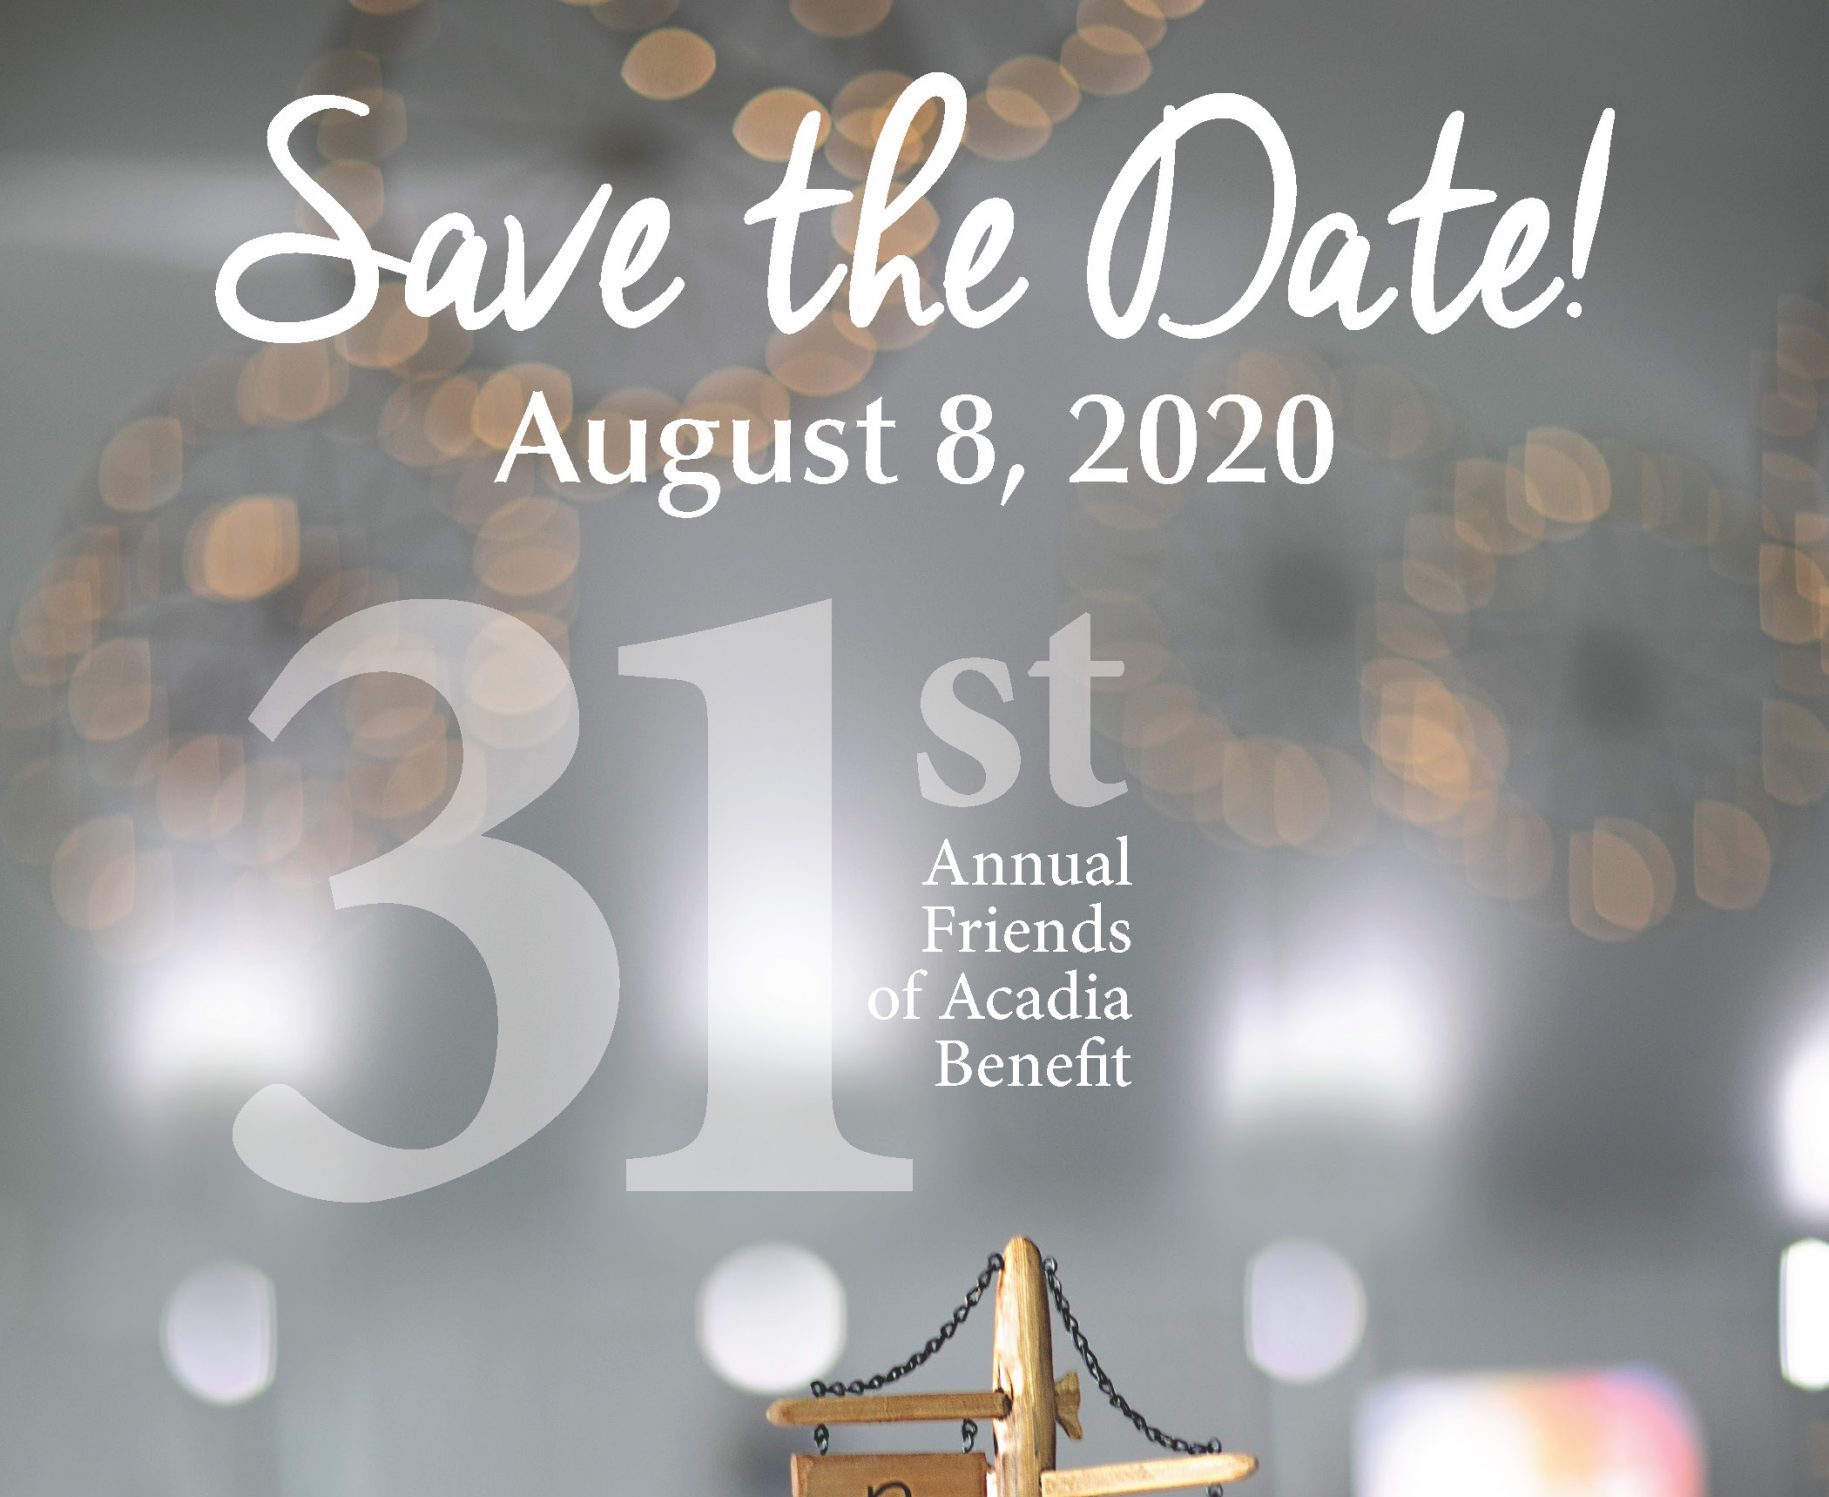 Save the Date for 31st Annual Benefit